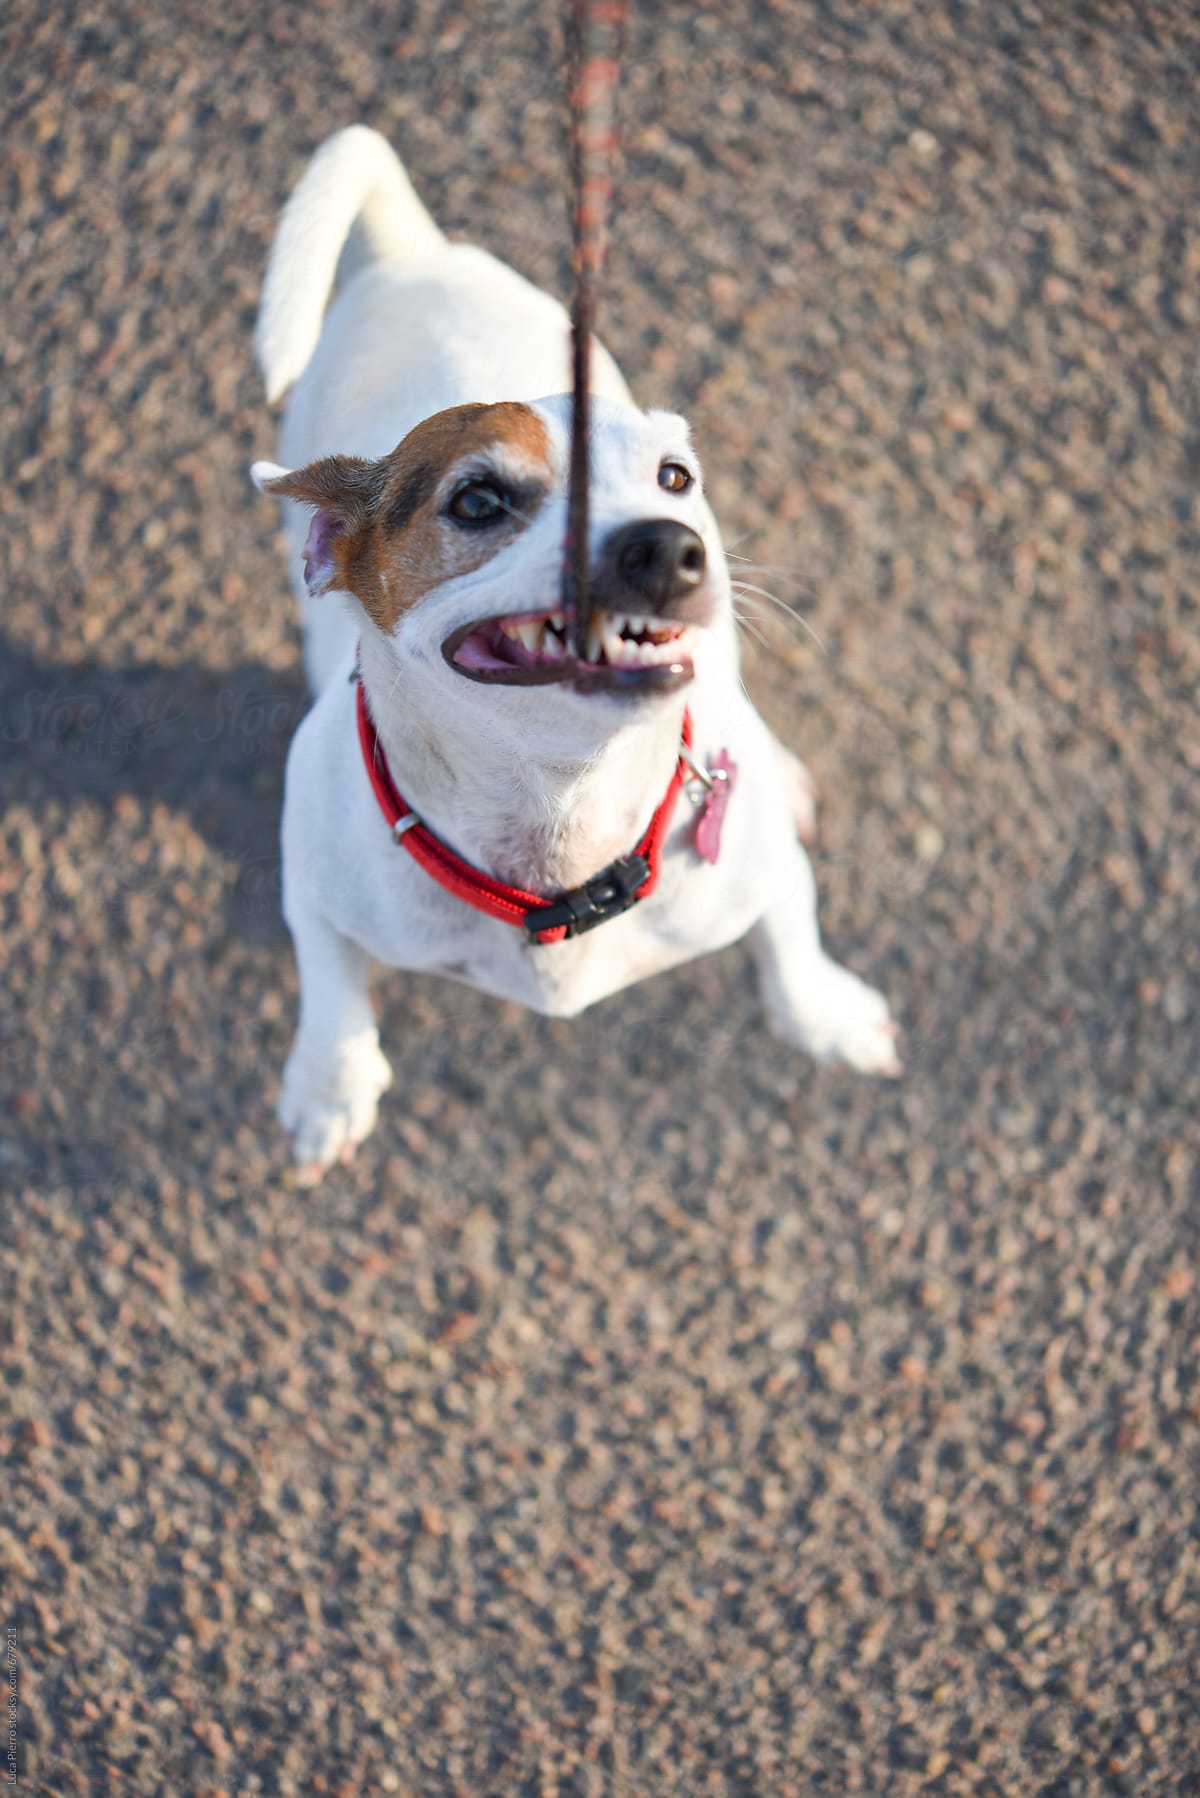 Jack Russell Terrier playing tug-of-war with the leash